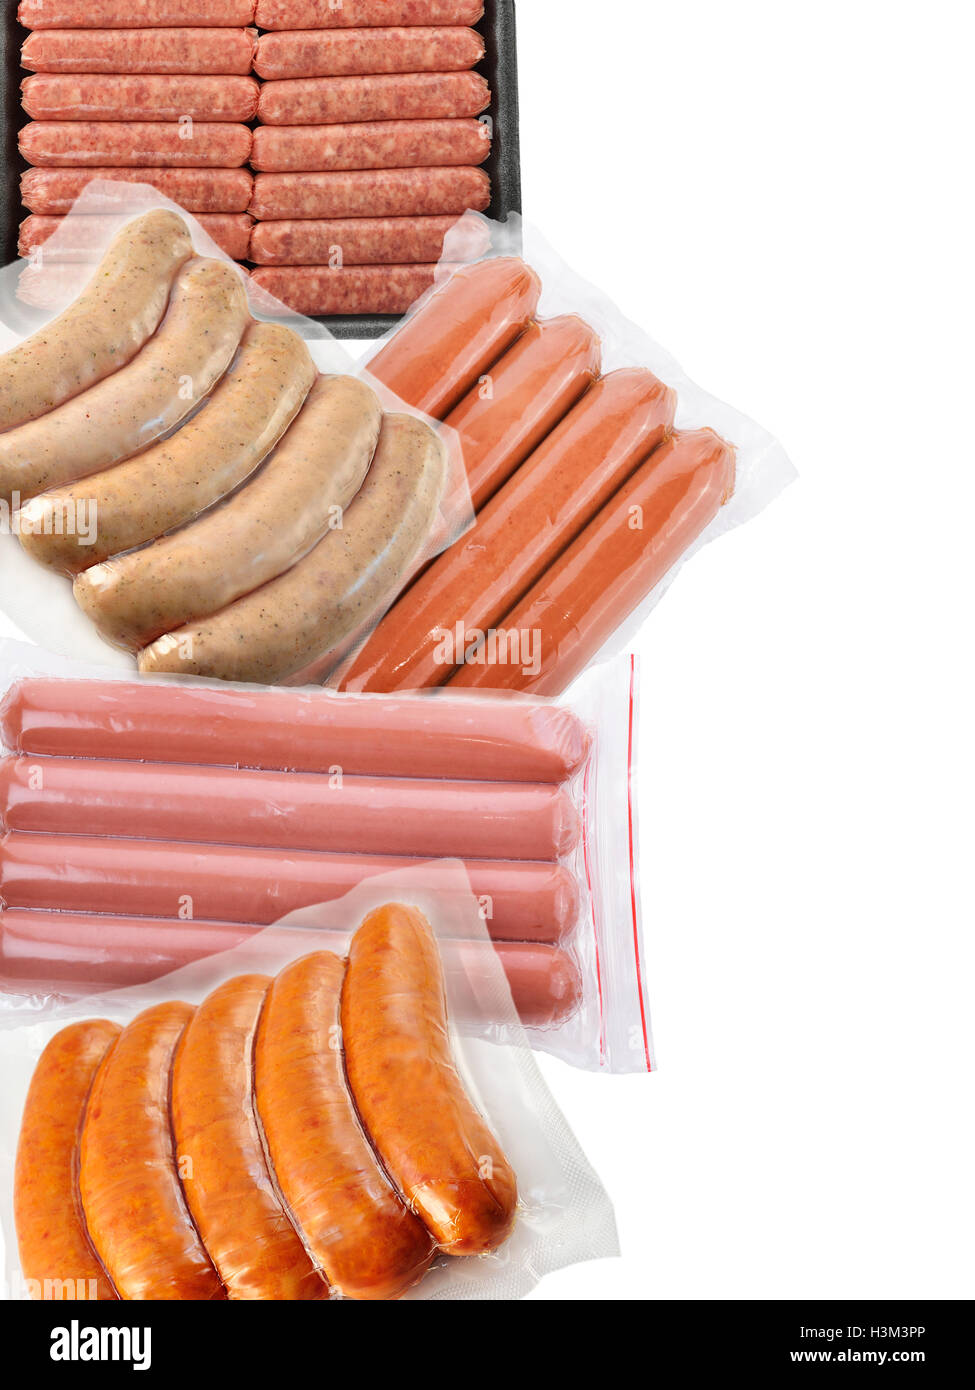 Sausages Collection Stock Photo